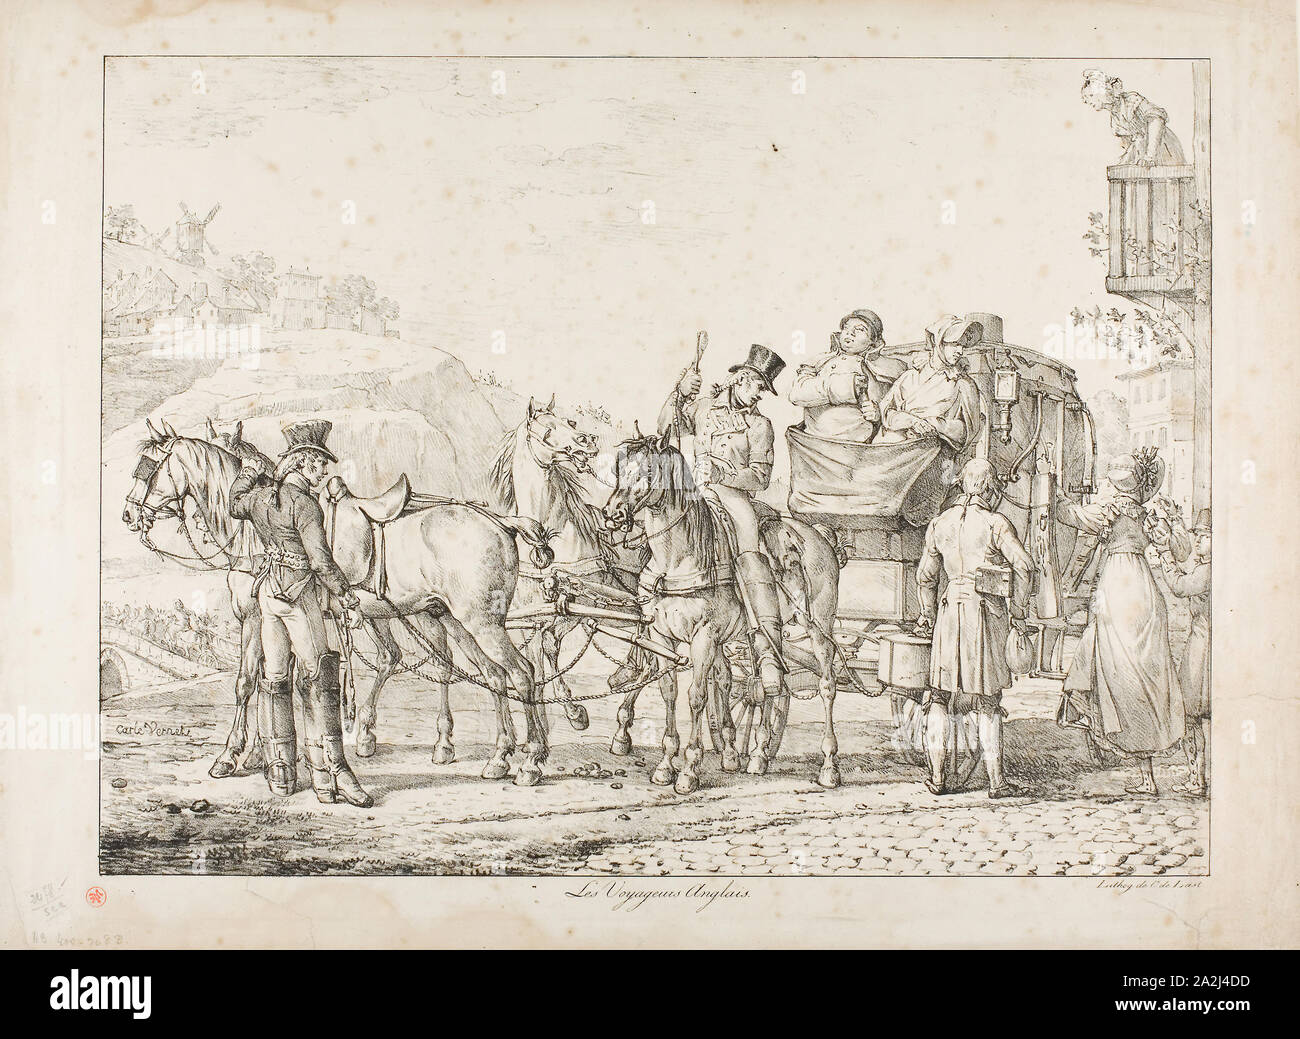 English Travellers, 1815–25, Carle Vernet (French, 1758-1836), printed by Comte Charles Philibert de Lasteyrie (French, 1759-1849), France, Lithograph in black on ivory wove paper, 341 × 462 mm (image), 401 × 548 mm (sheet Stock Photo